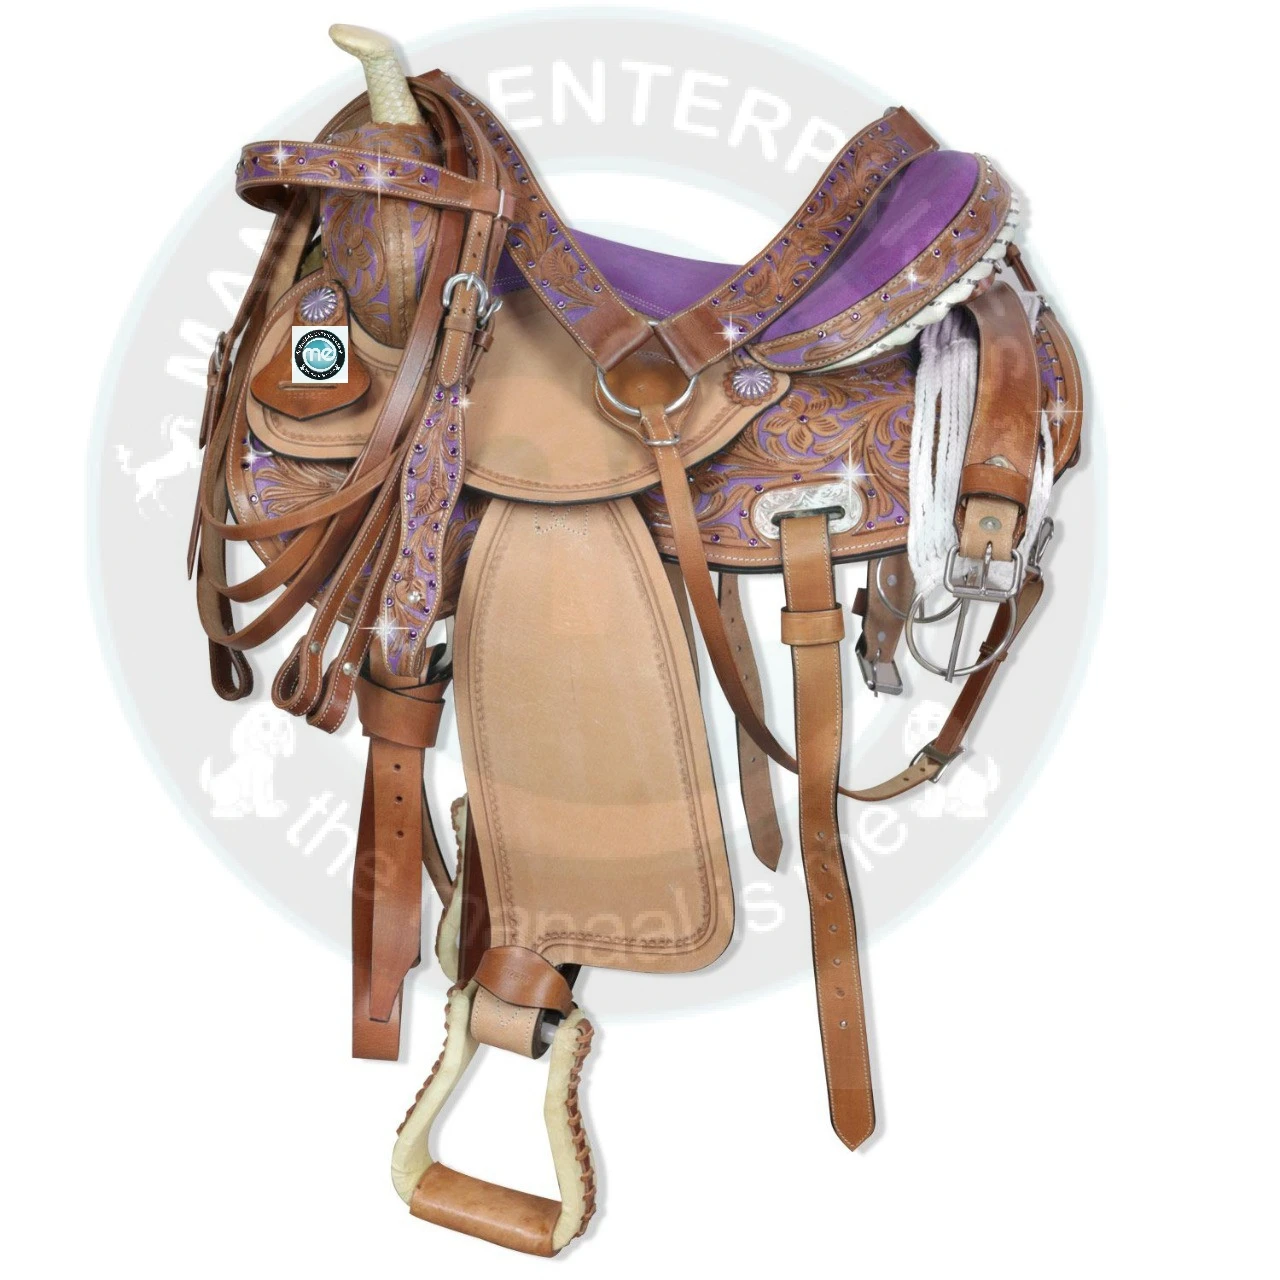 Manaal Enterprises Premium Leather Western Barrel Racing Adult Horse Saddle Get Headstall, Breast Collar, & Reins, Size 14 to 18